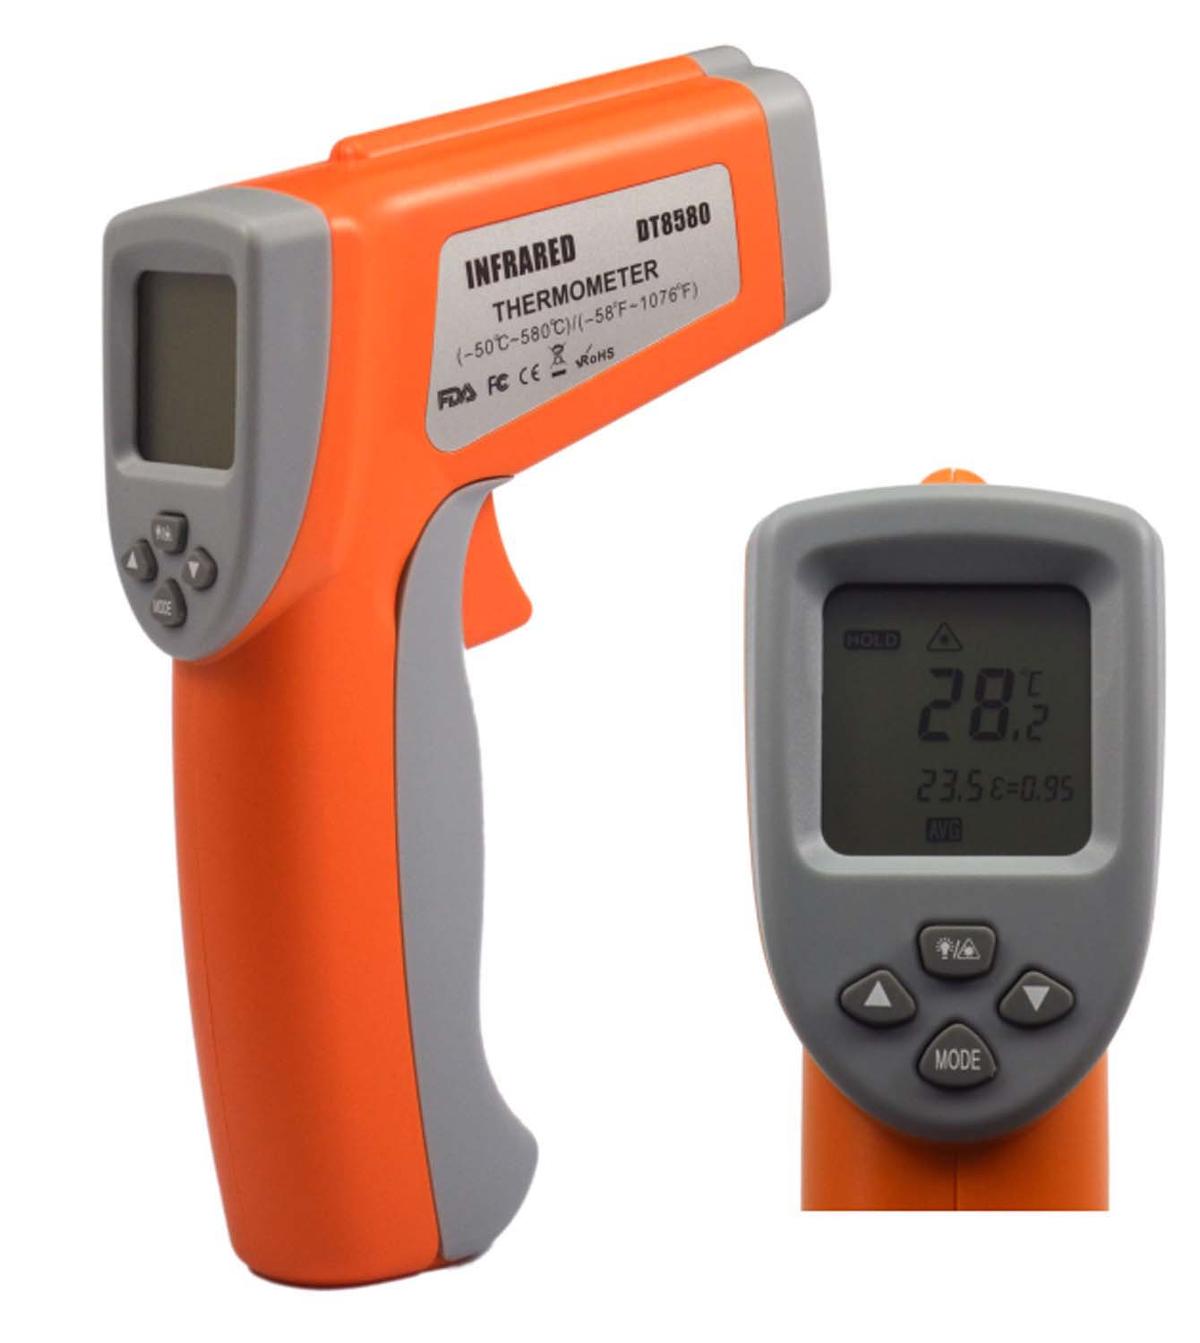 64°C to 1800°C Dual Laser Infrared Thermocouple Thermometer